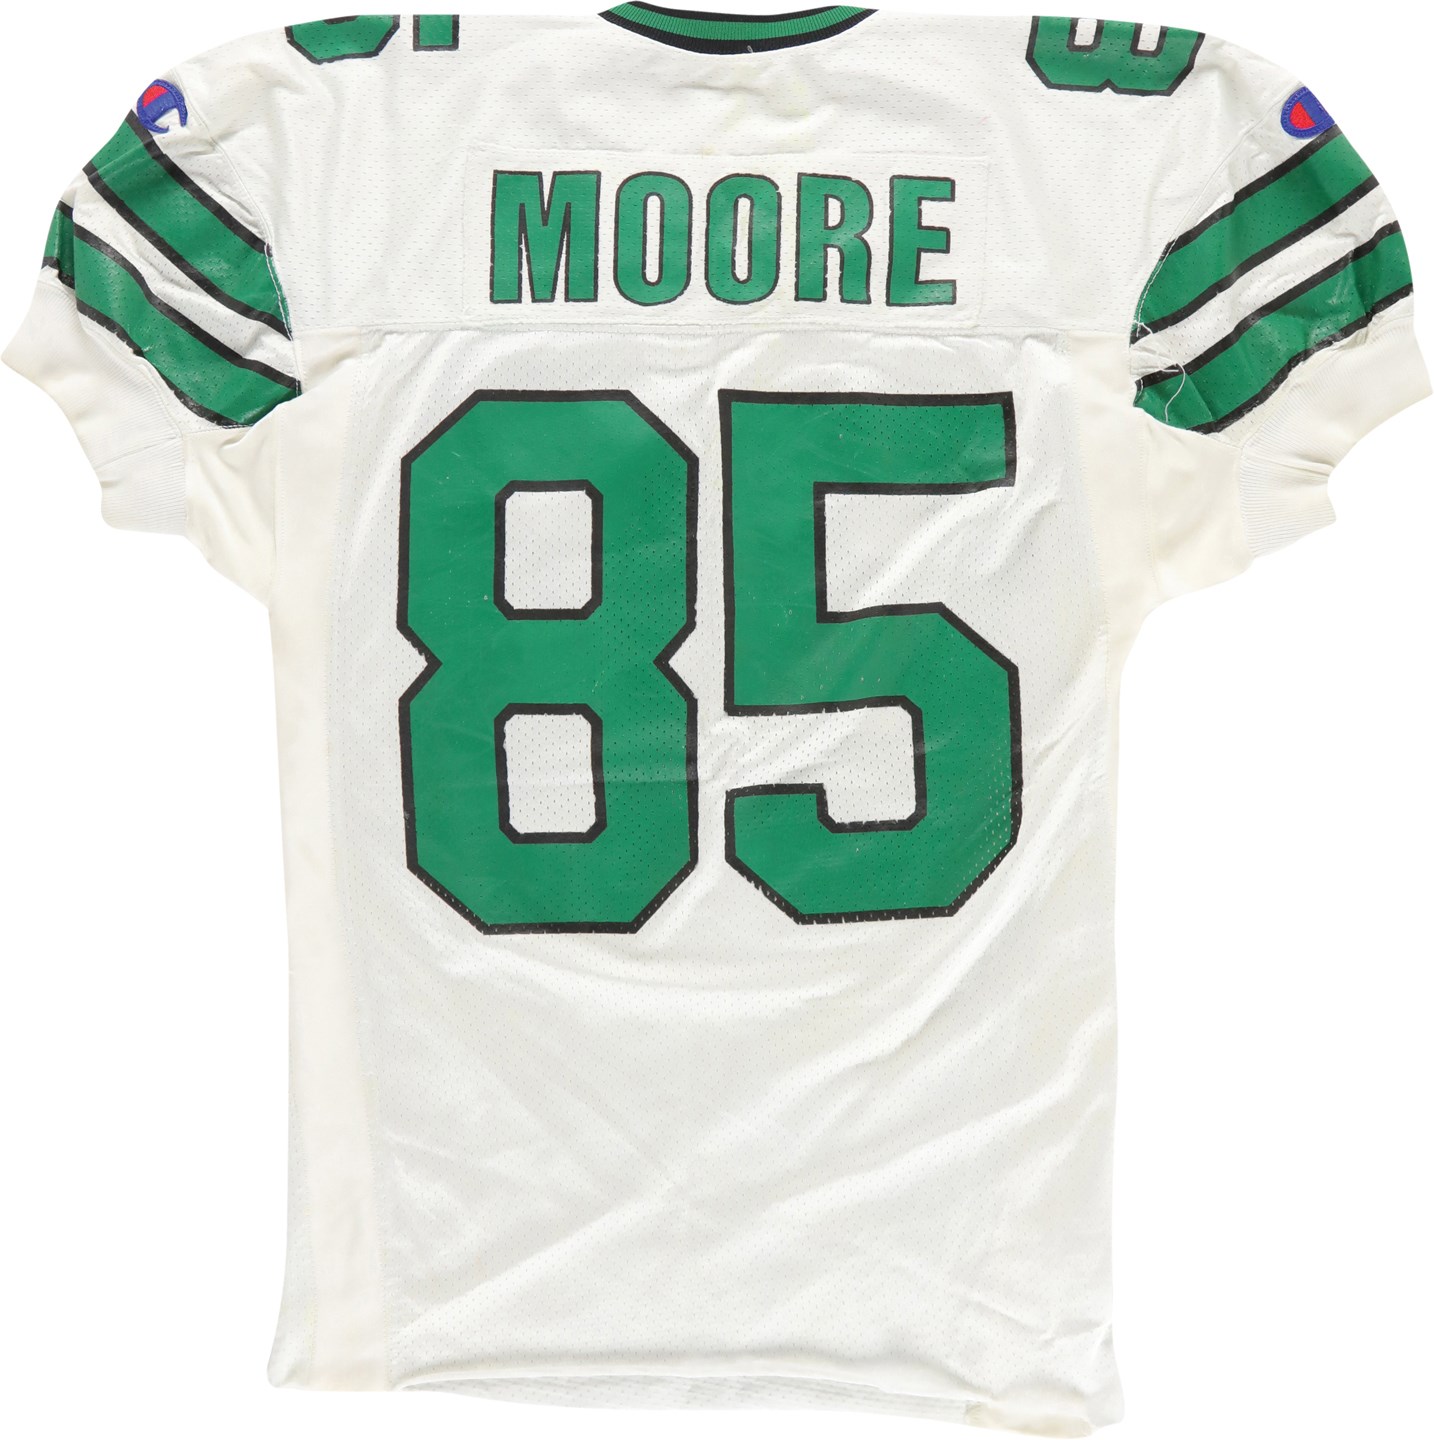 Football - 1994 Rob Moore New York Jets "Touchdown" Game Worn Jersey (Photo-Matched)